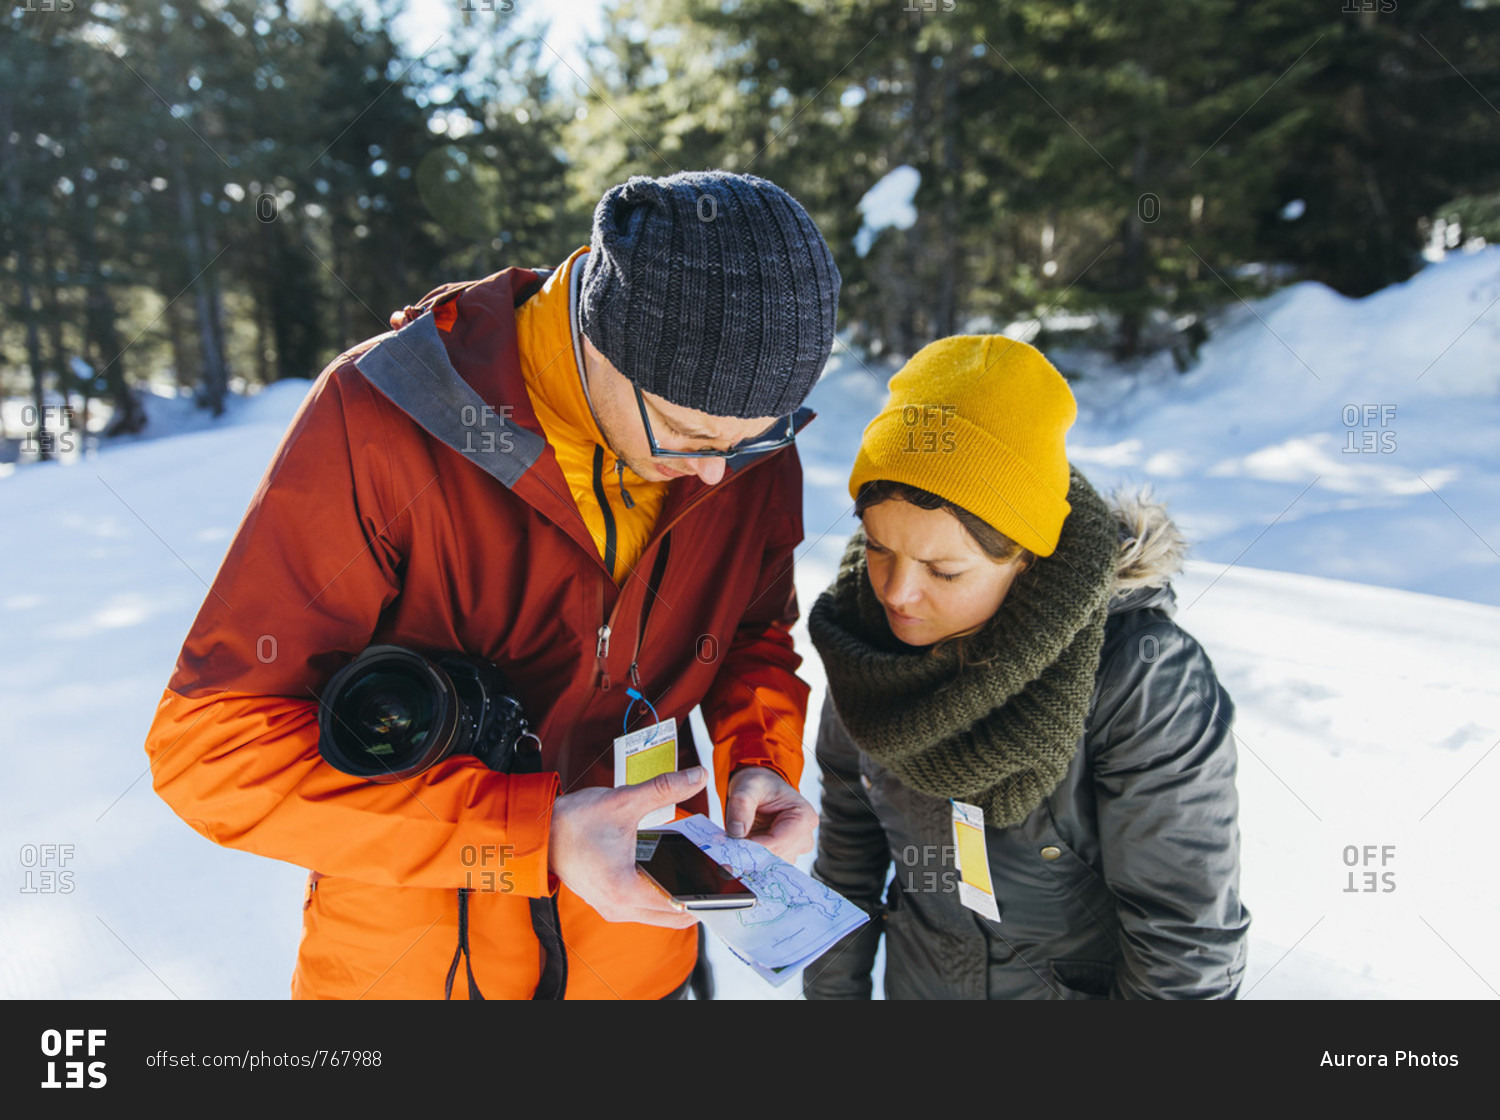 Waist up shot of man and woman checking map while hiking in winter, Whistler, British Columbia, Canada